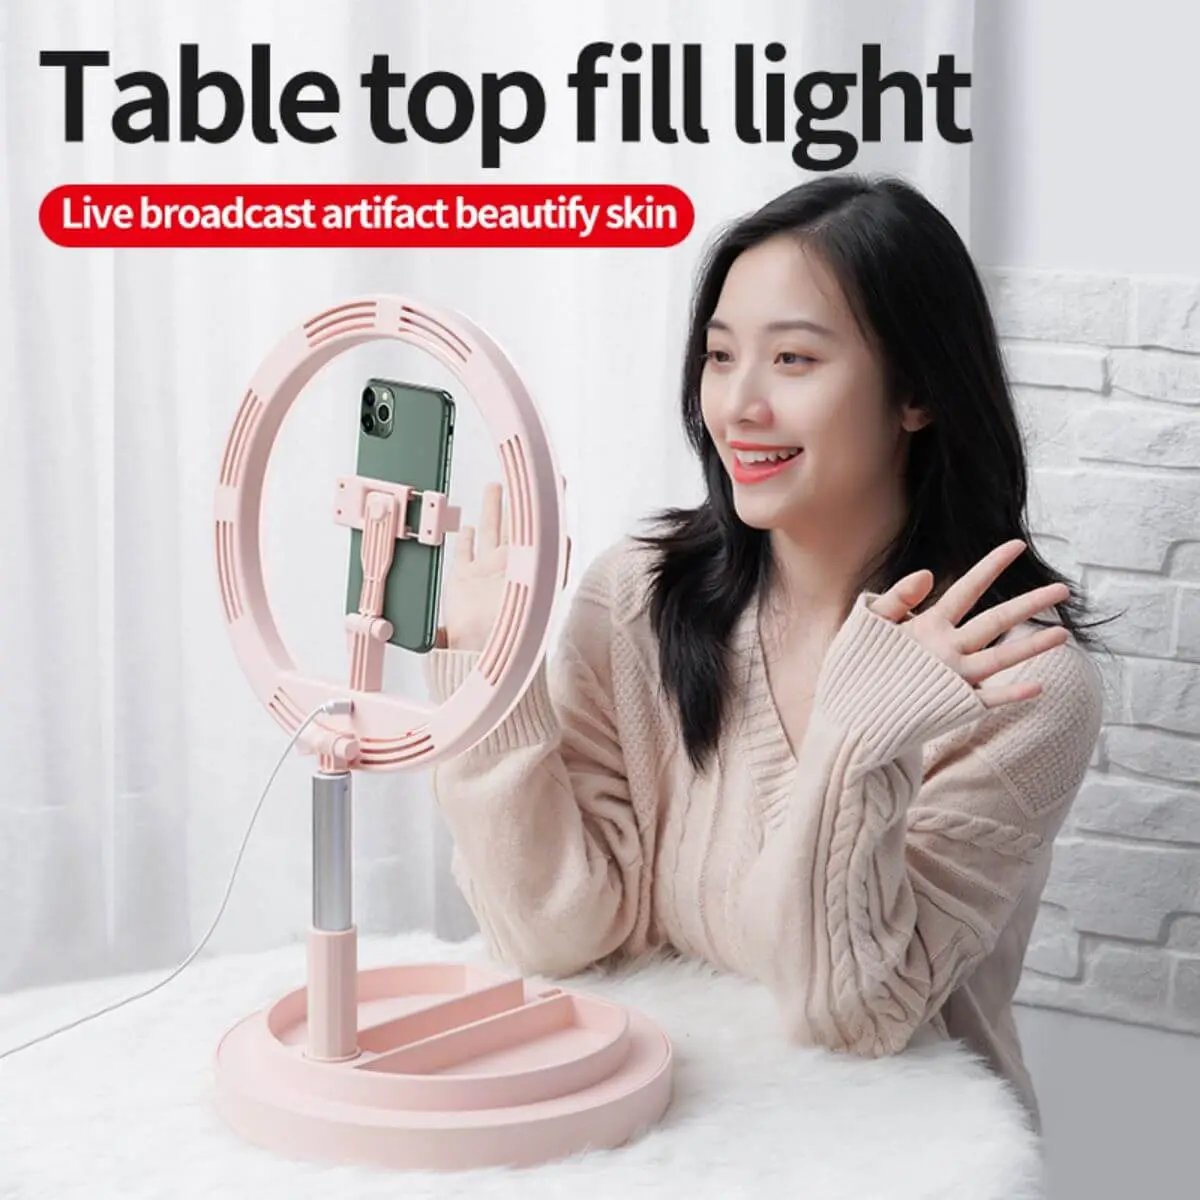 JM01 Foldable Selfie Ring Light with Stand-Hugmie